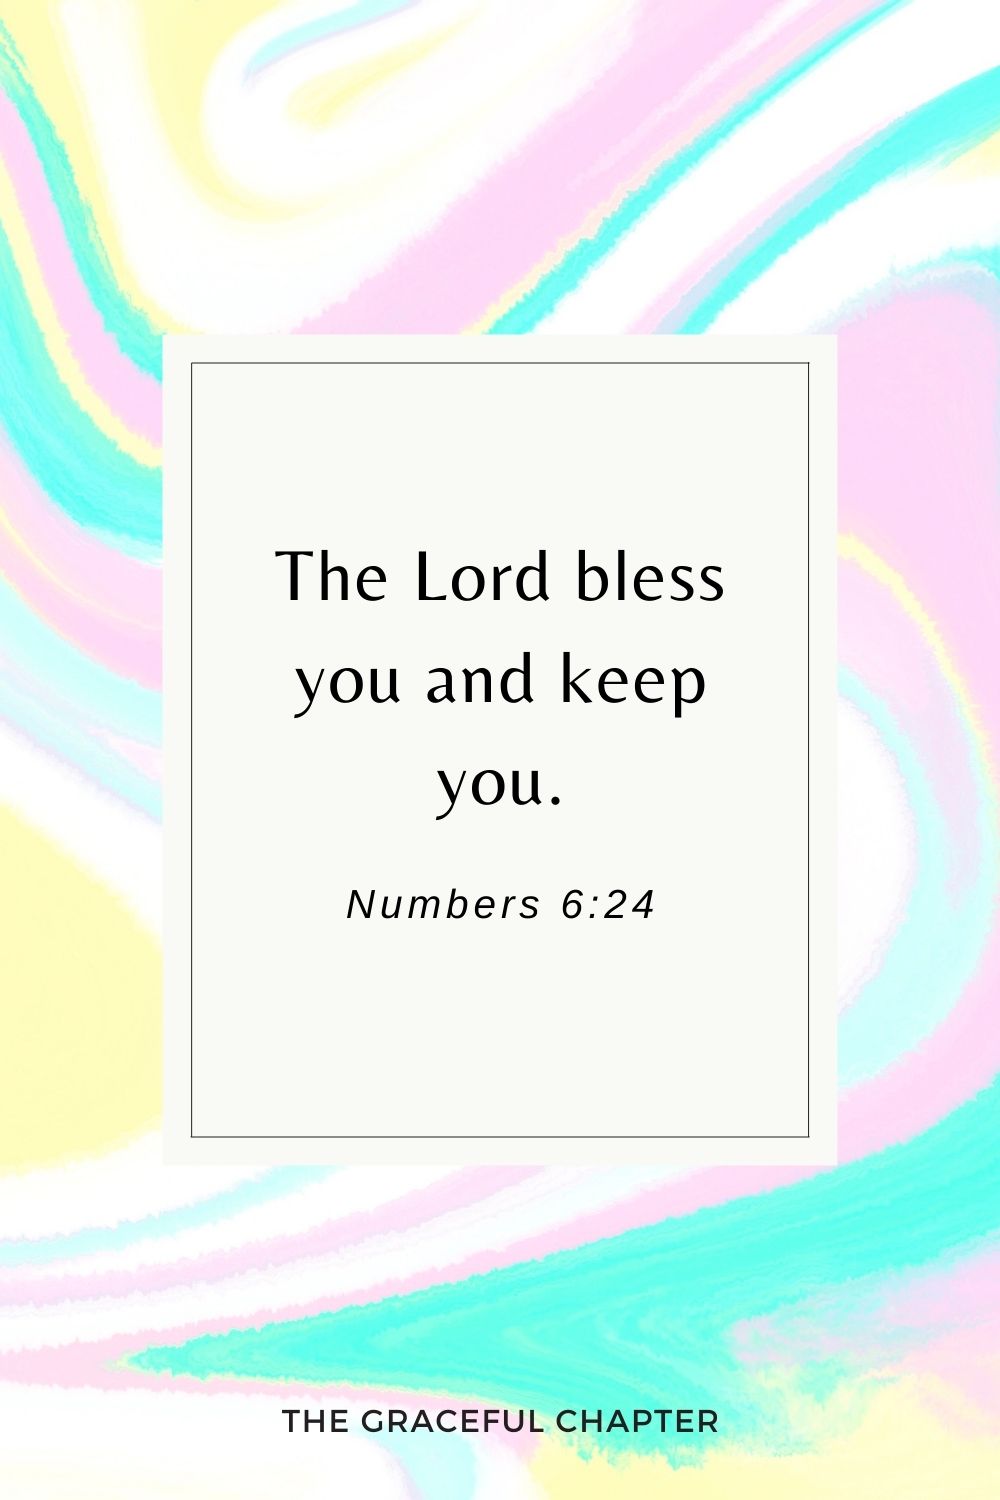 The Lord bless you and keep you. Numbers 6:24